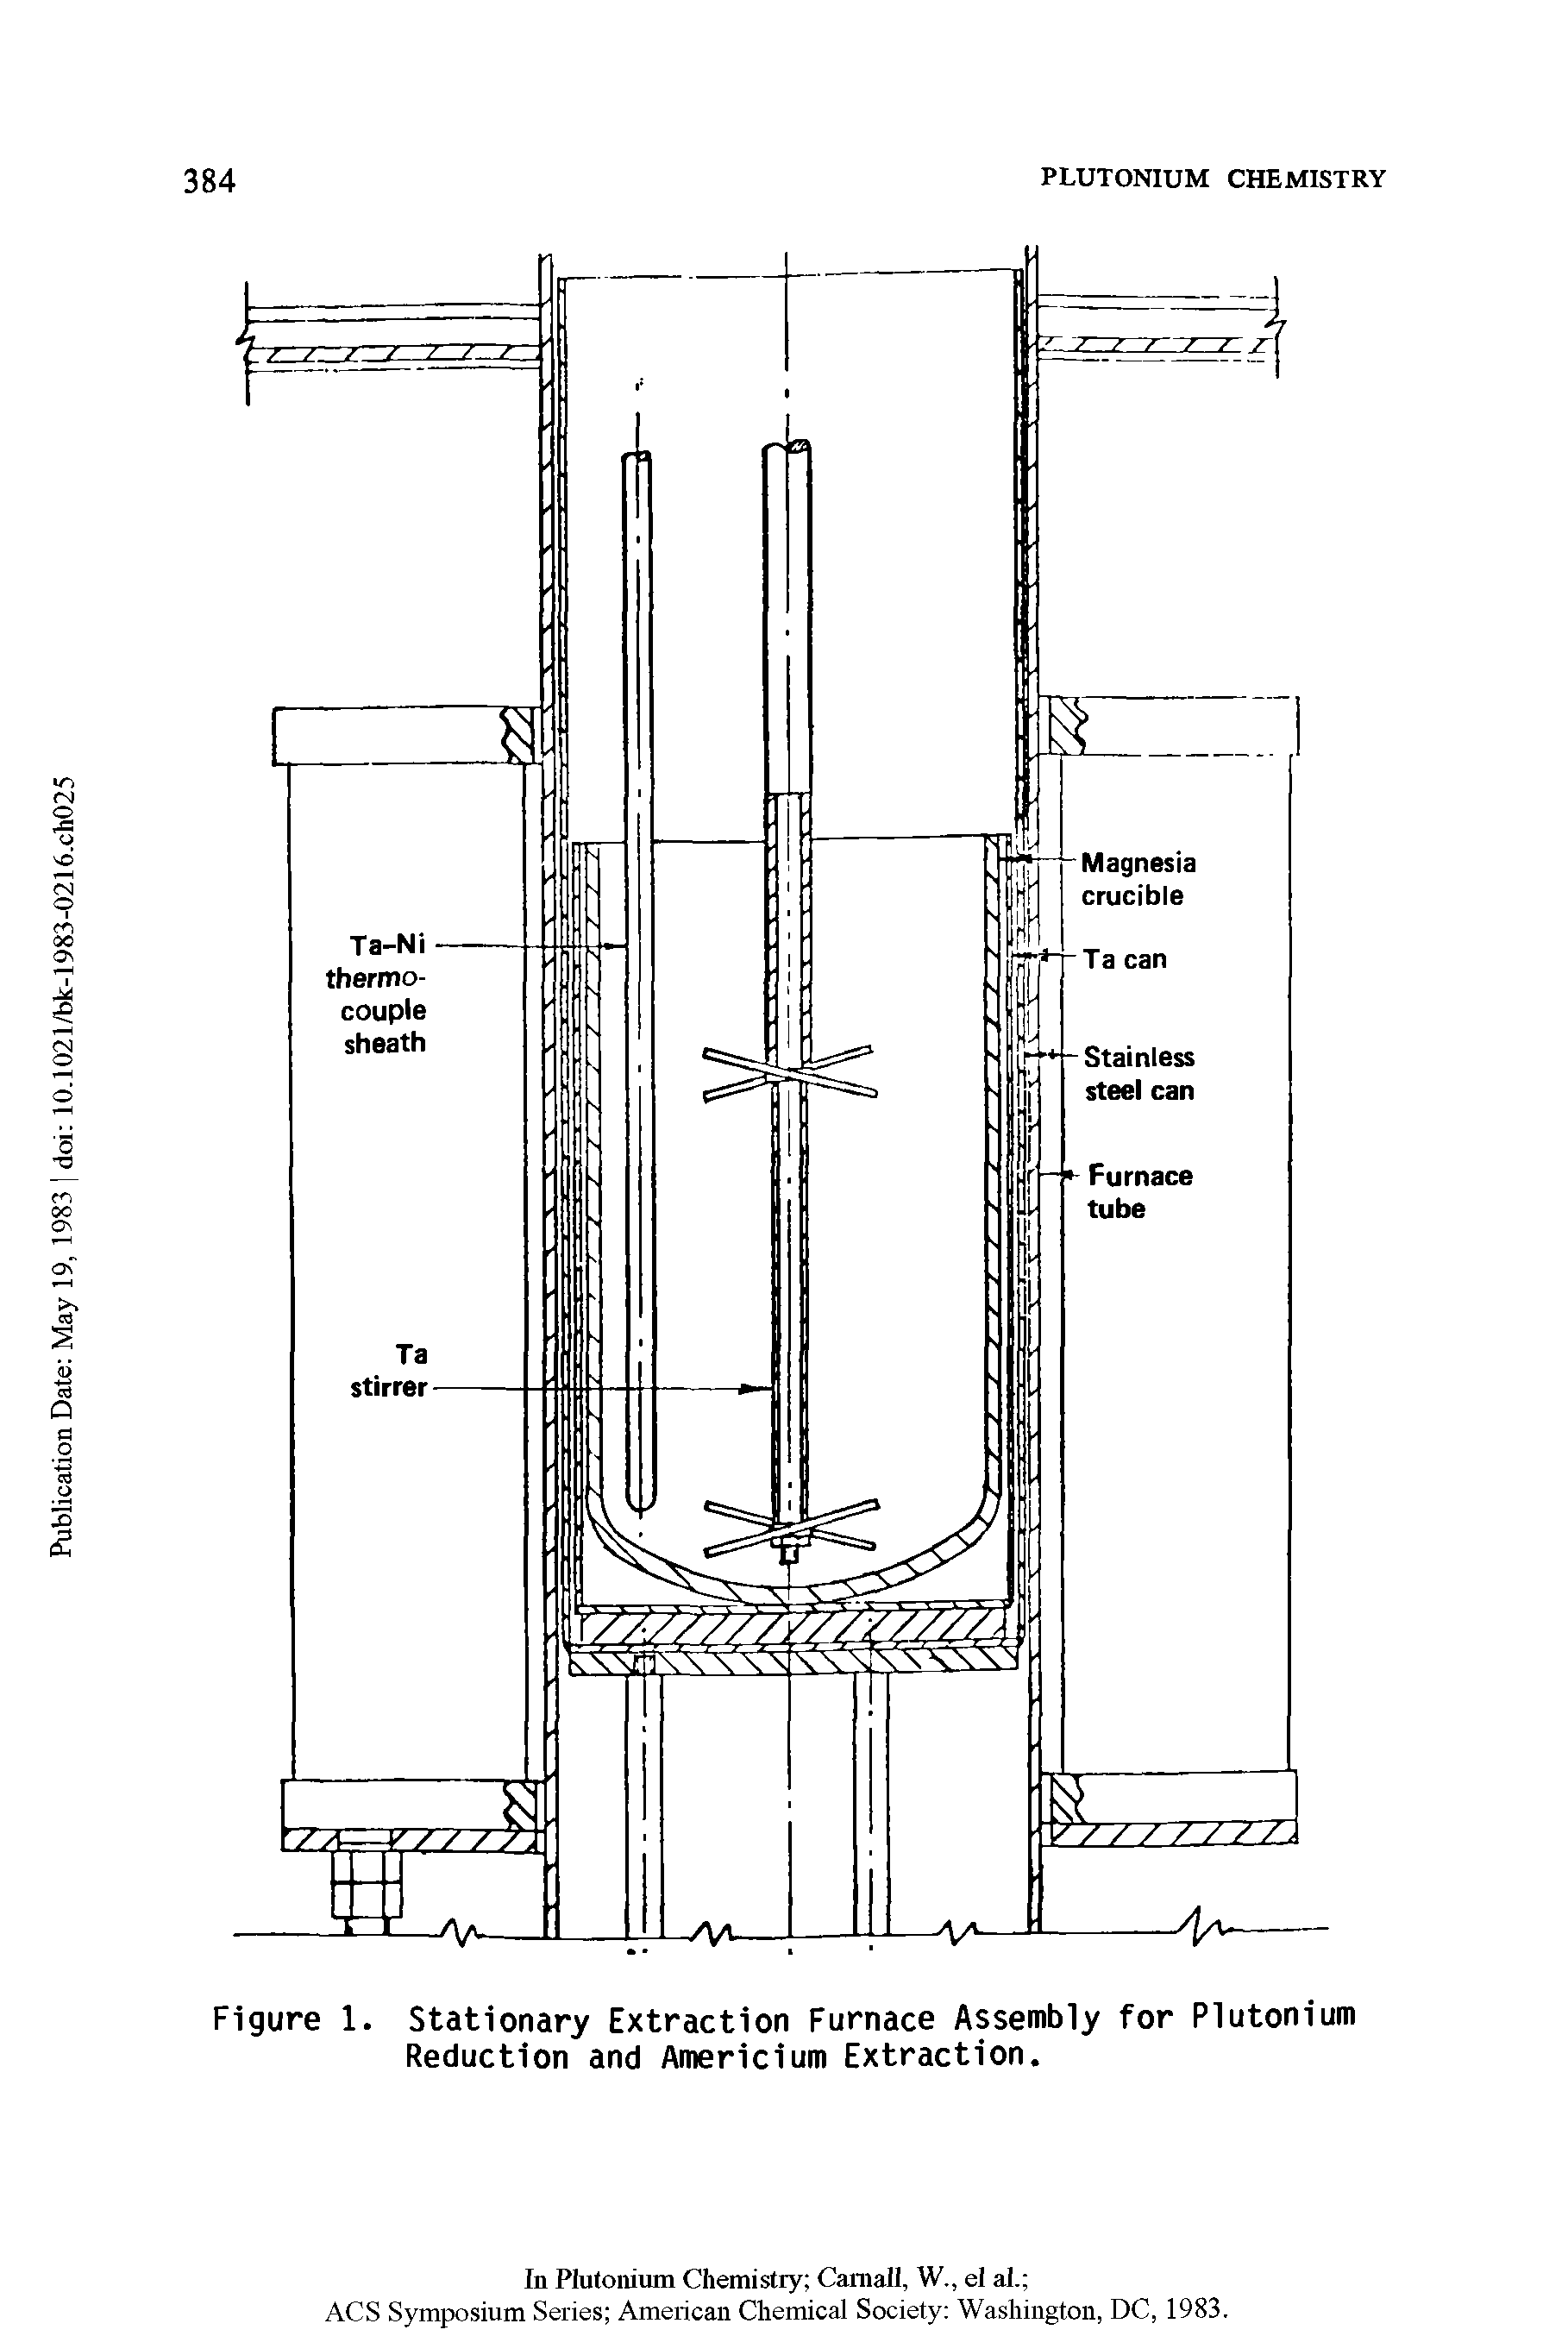 Figure 1. Stationary Extraction Furnace Assembly for Plutonium Reduction and Americium Extraction.